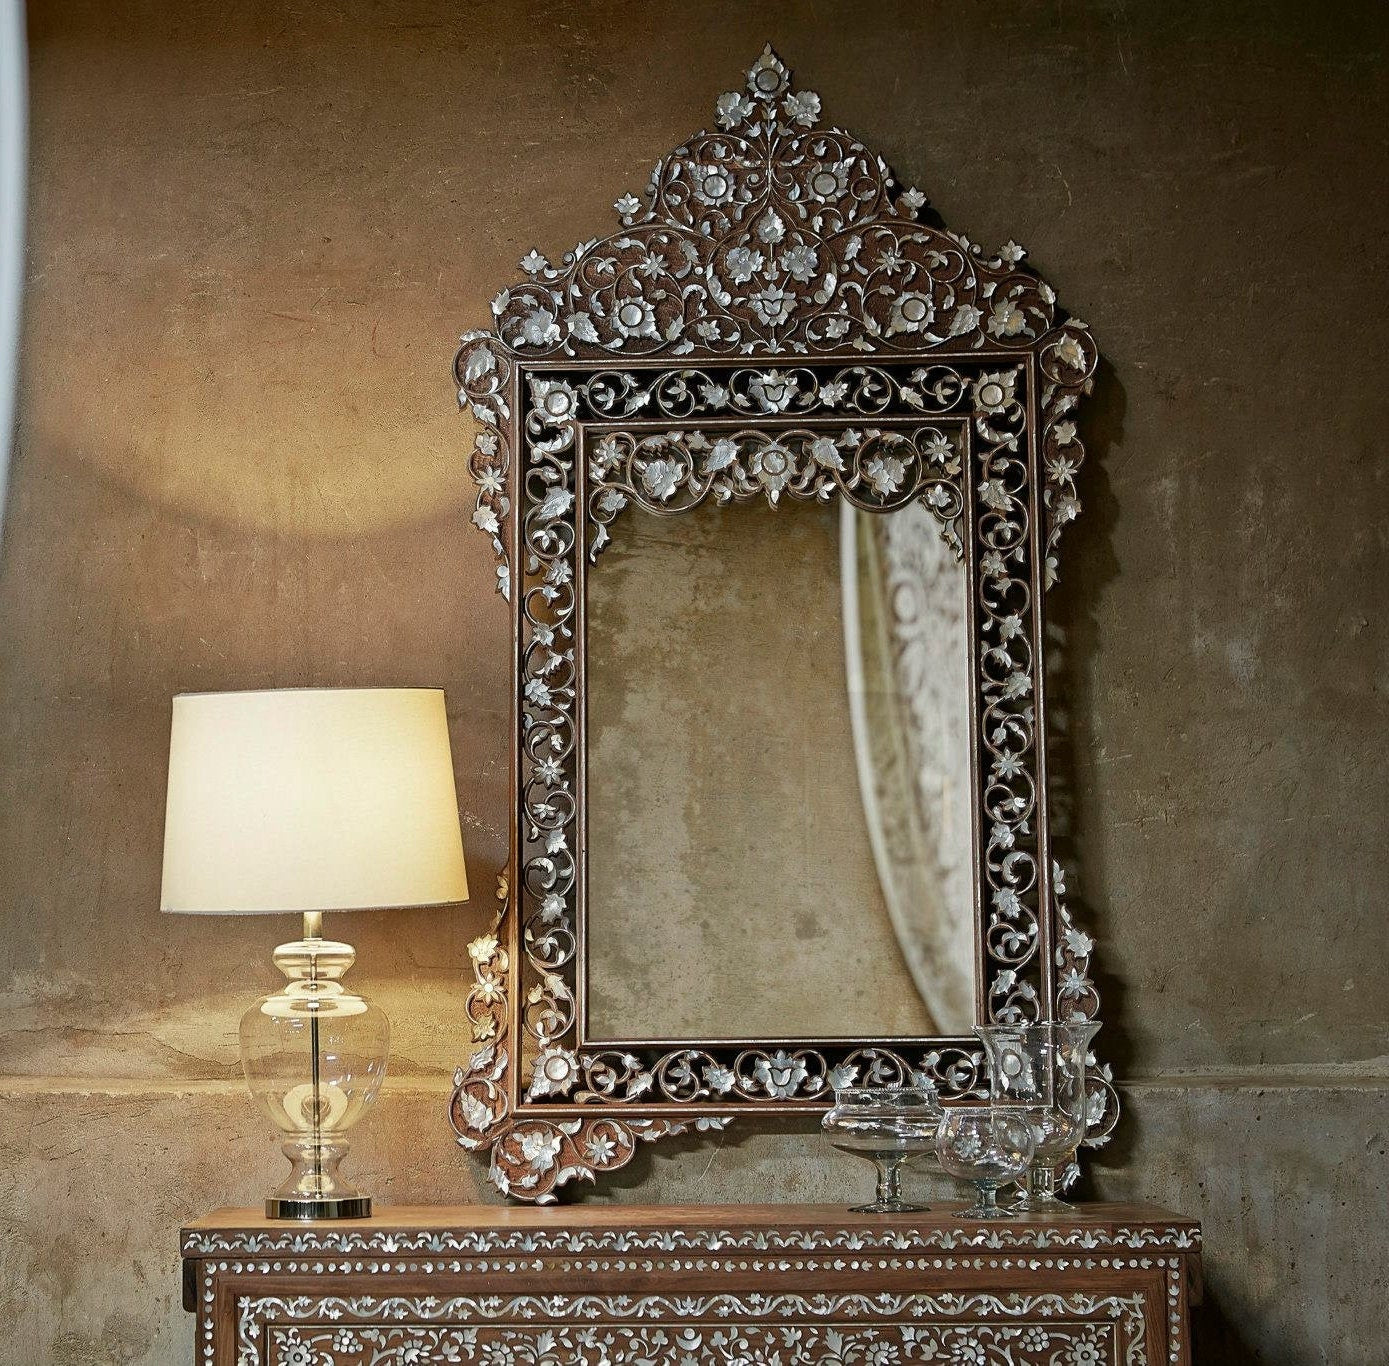 Syrian Mother Of Pearl Inlaid Mirror Frame